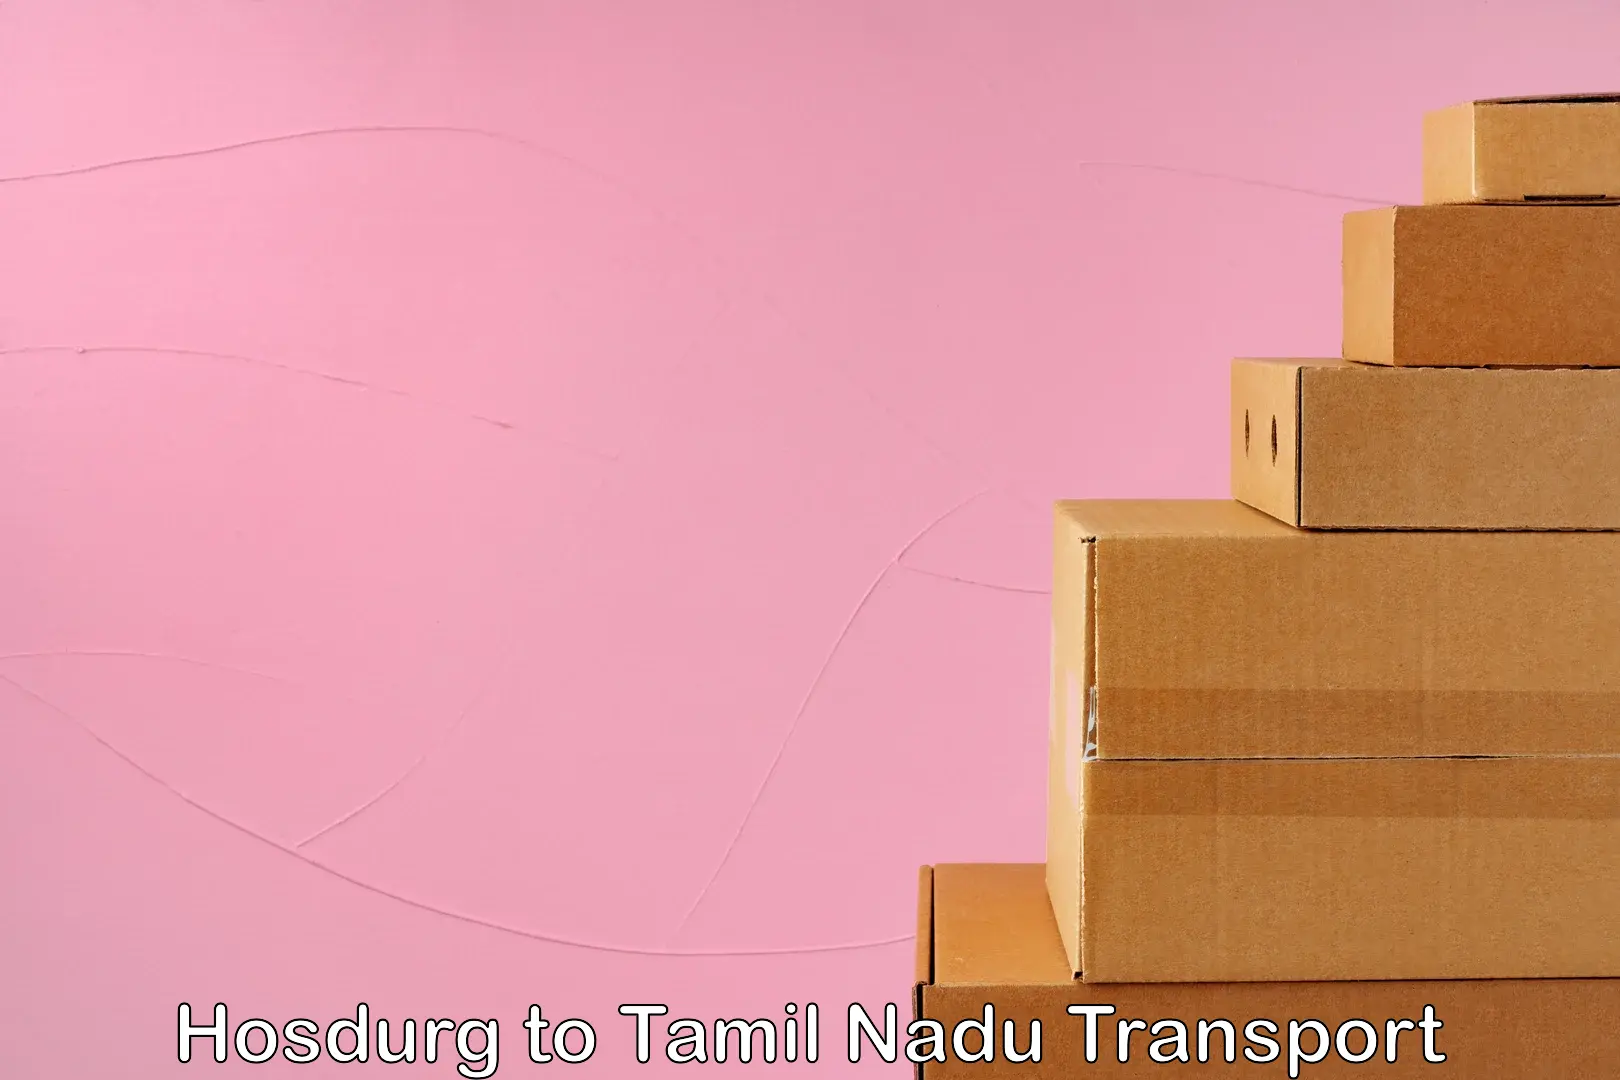 Logistics transportation services Hosdurg to SRM Institute of Science and Technology Chennai